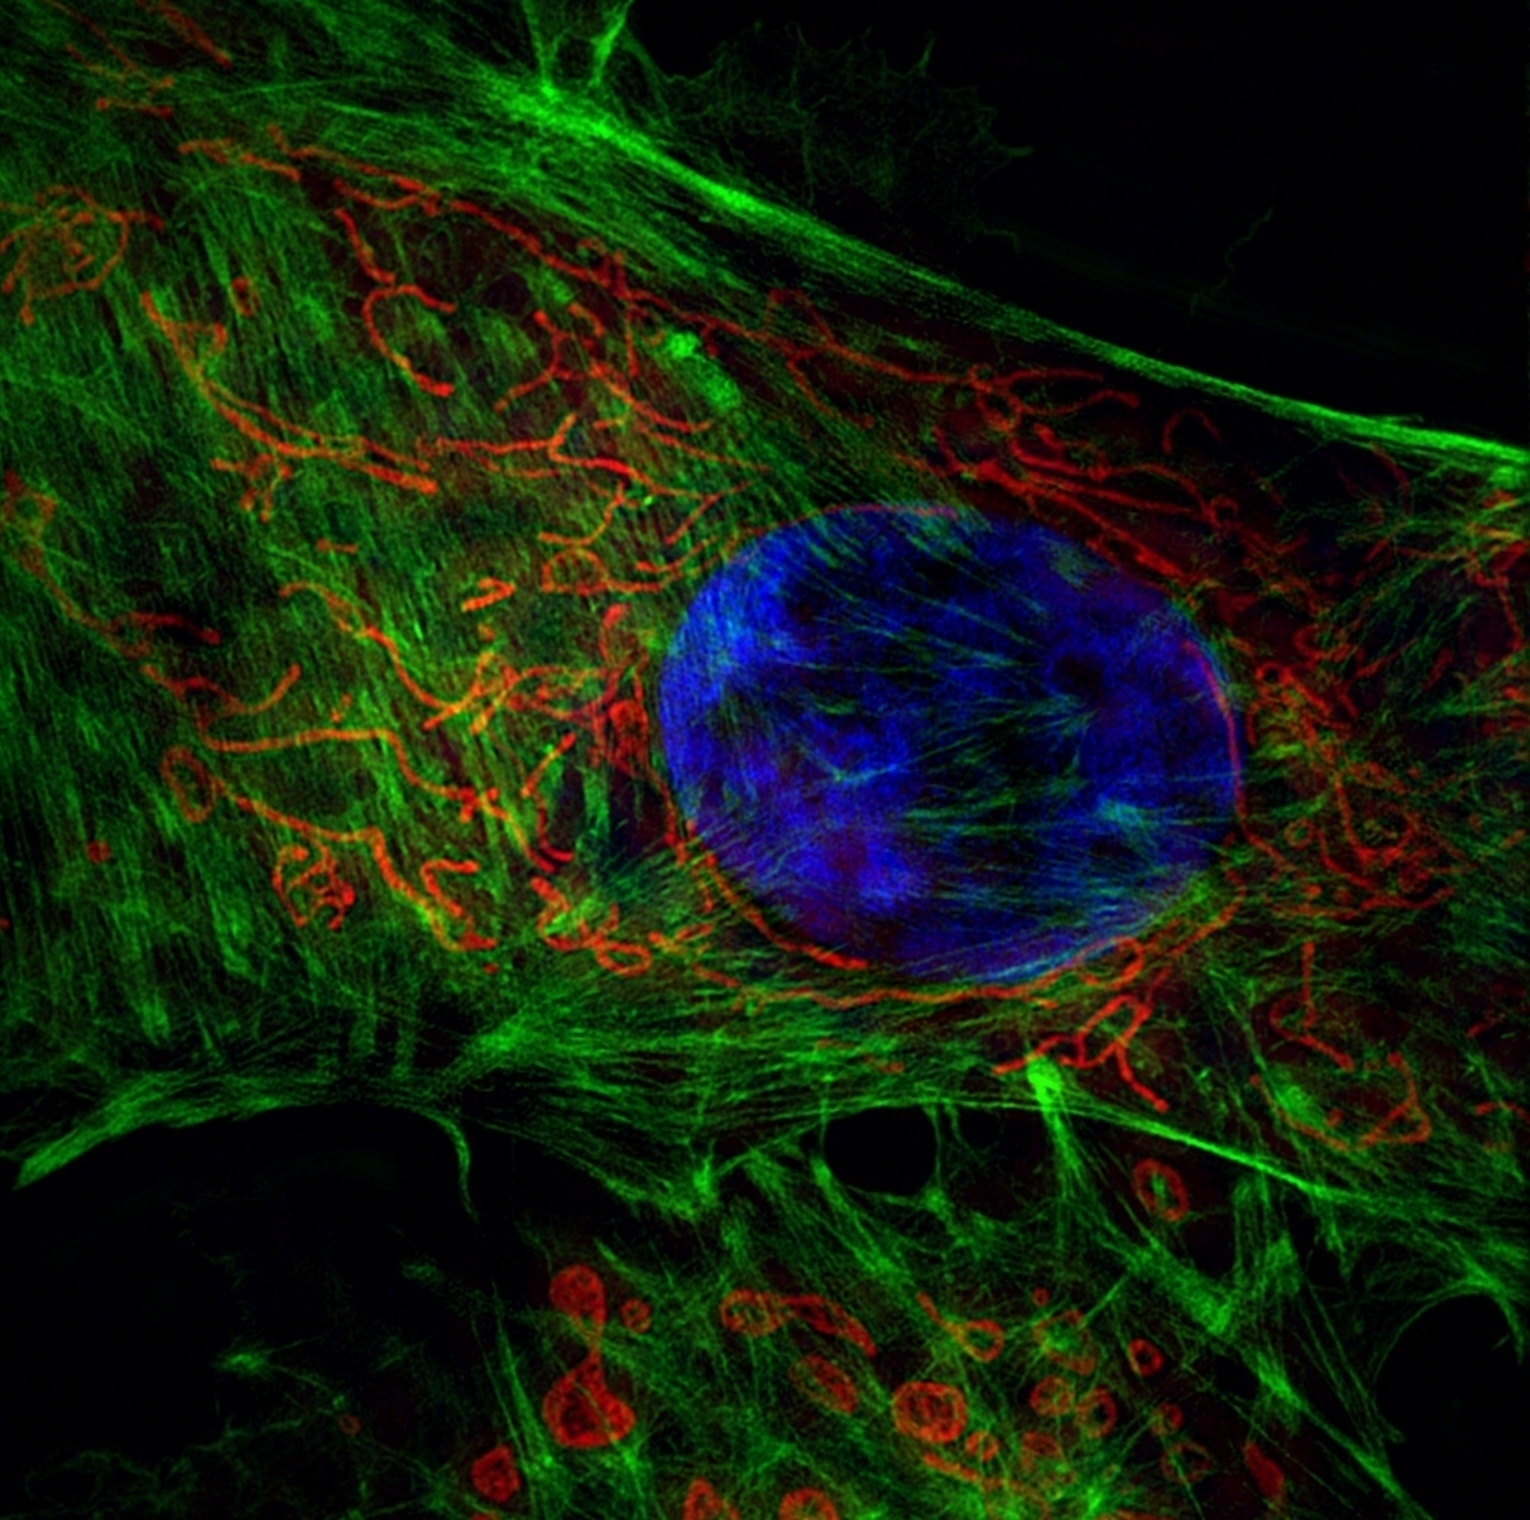 A human cell showing the cell nucleus in blue, the mitochondria in red and the actin filaments in green, using super resolution microscopy. 